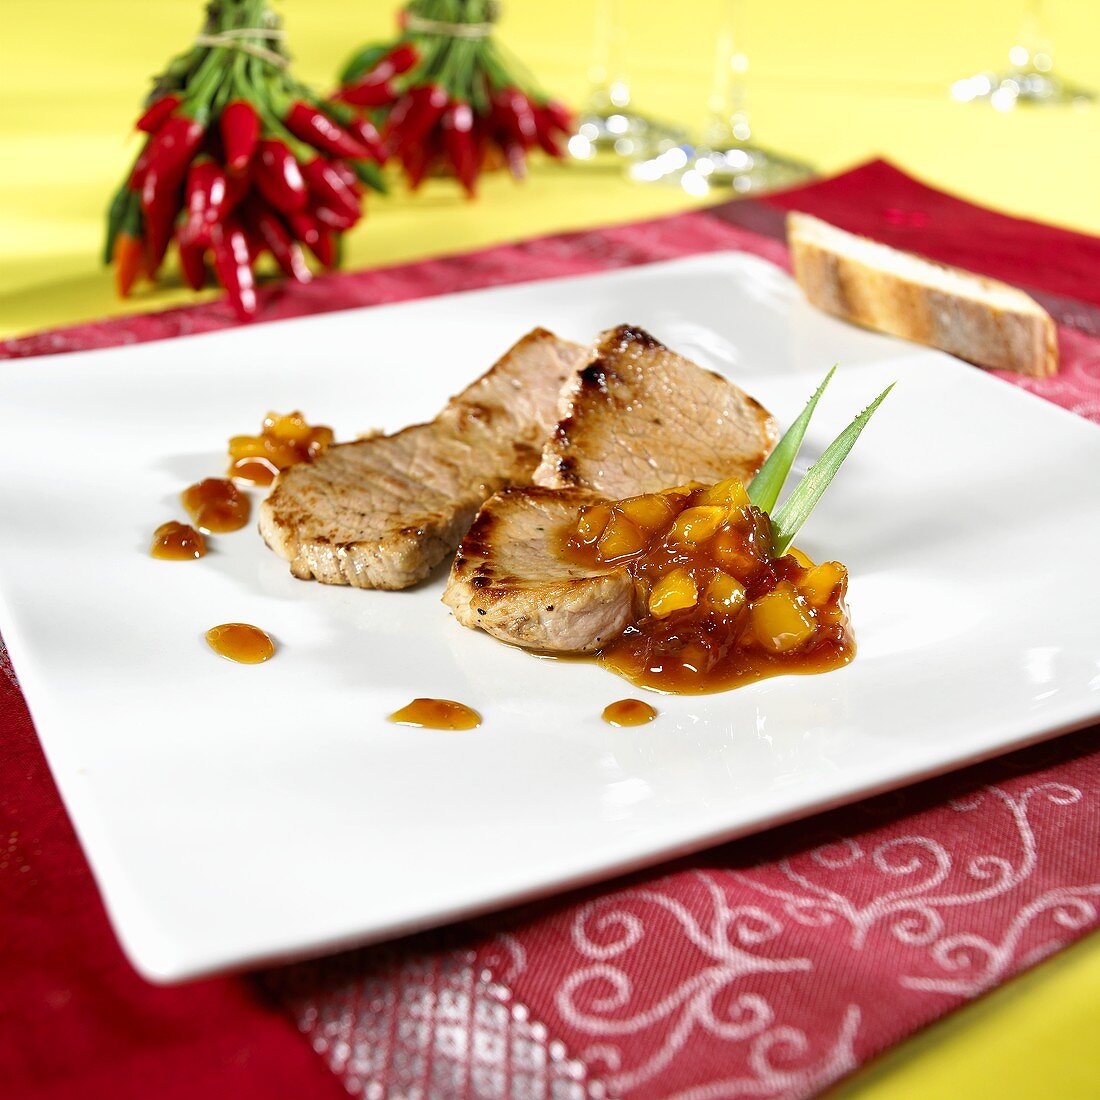 Veal escalopes with fruity sauce